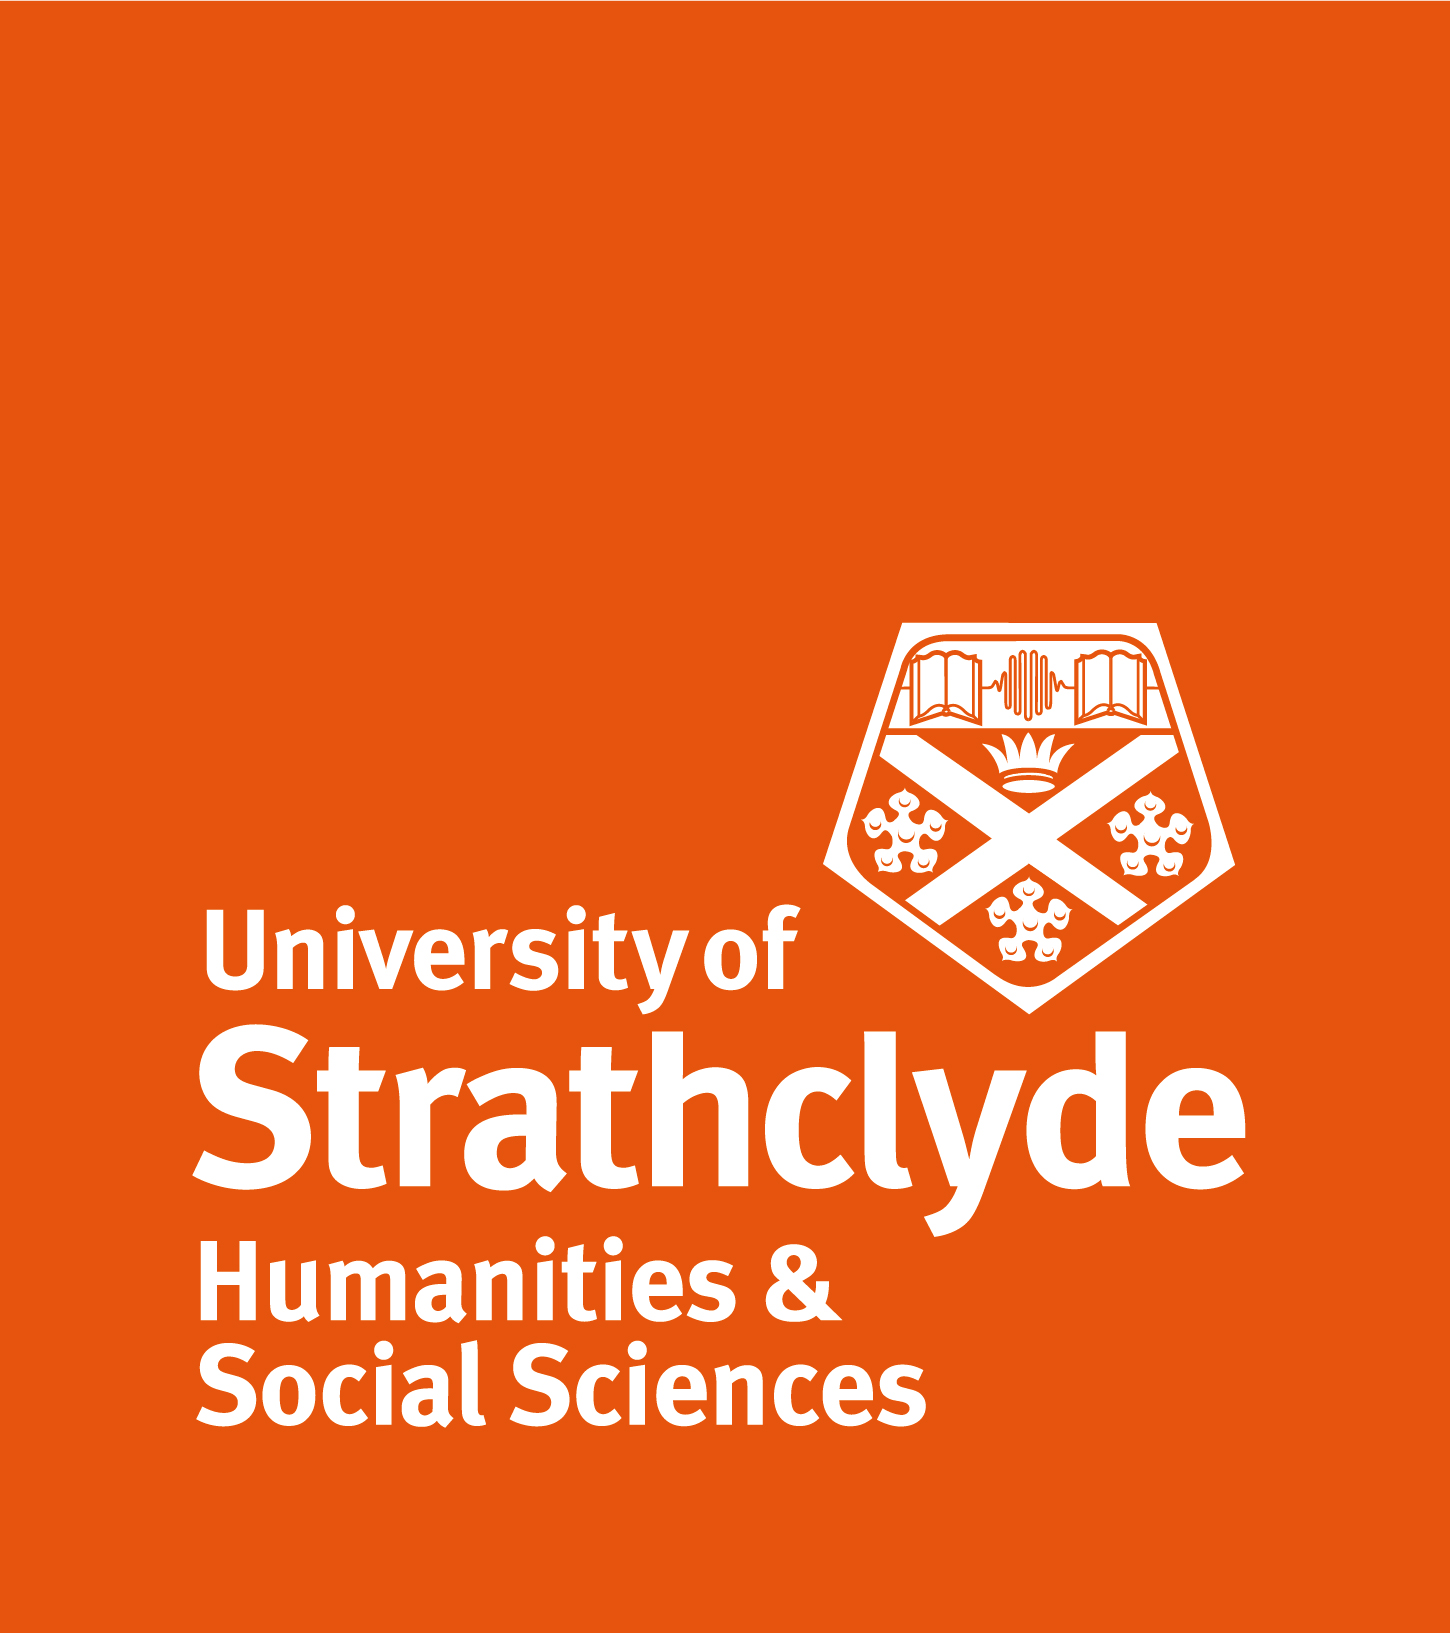 Orange background with university logo and University of Strathclyde HASS written in white text